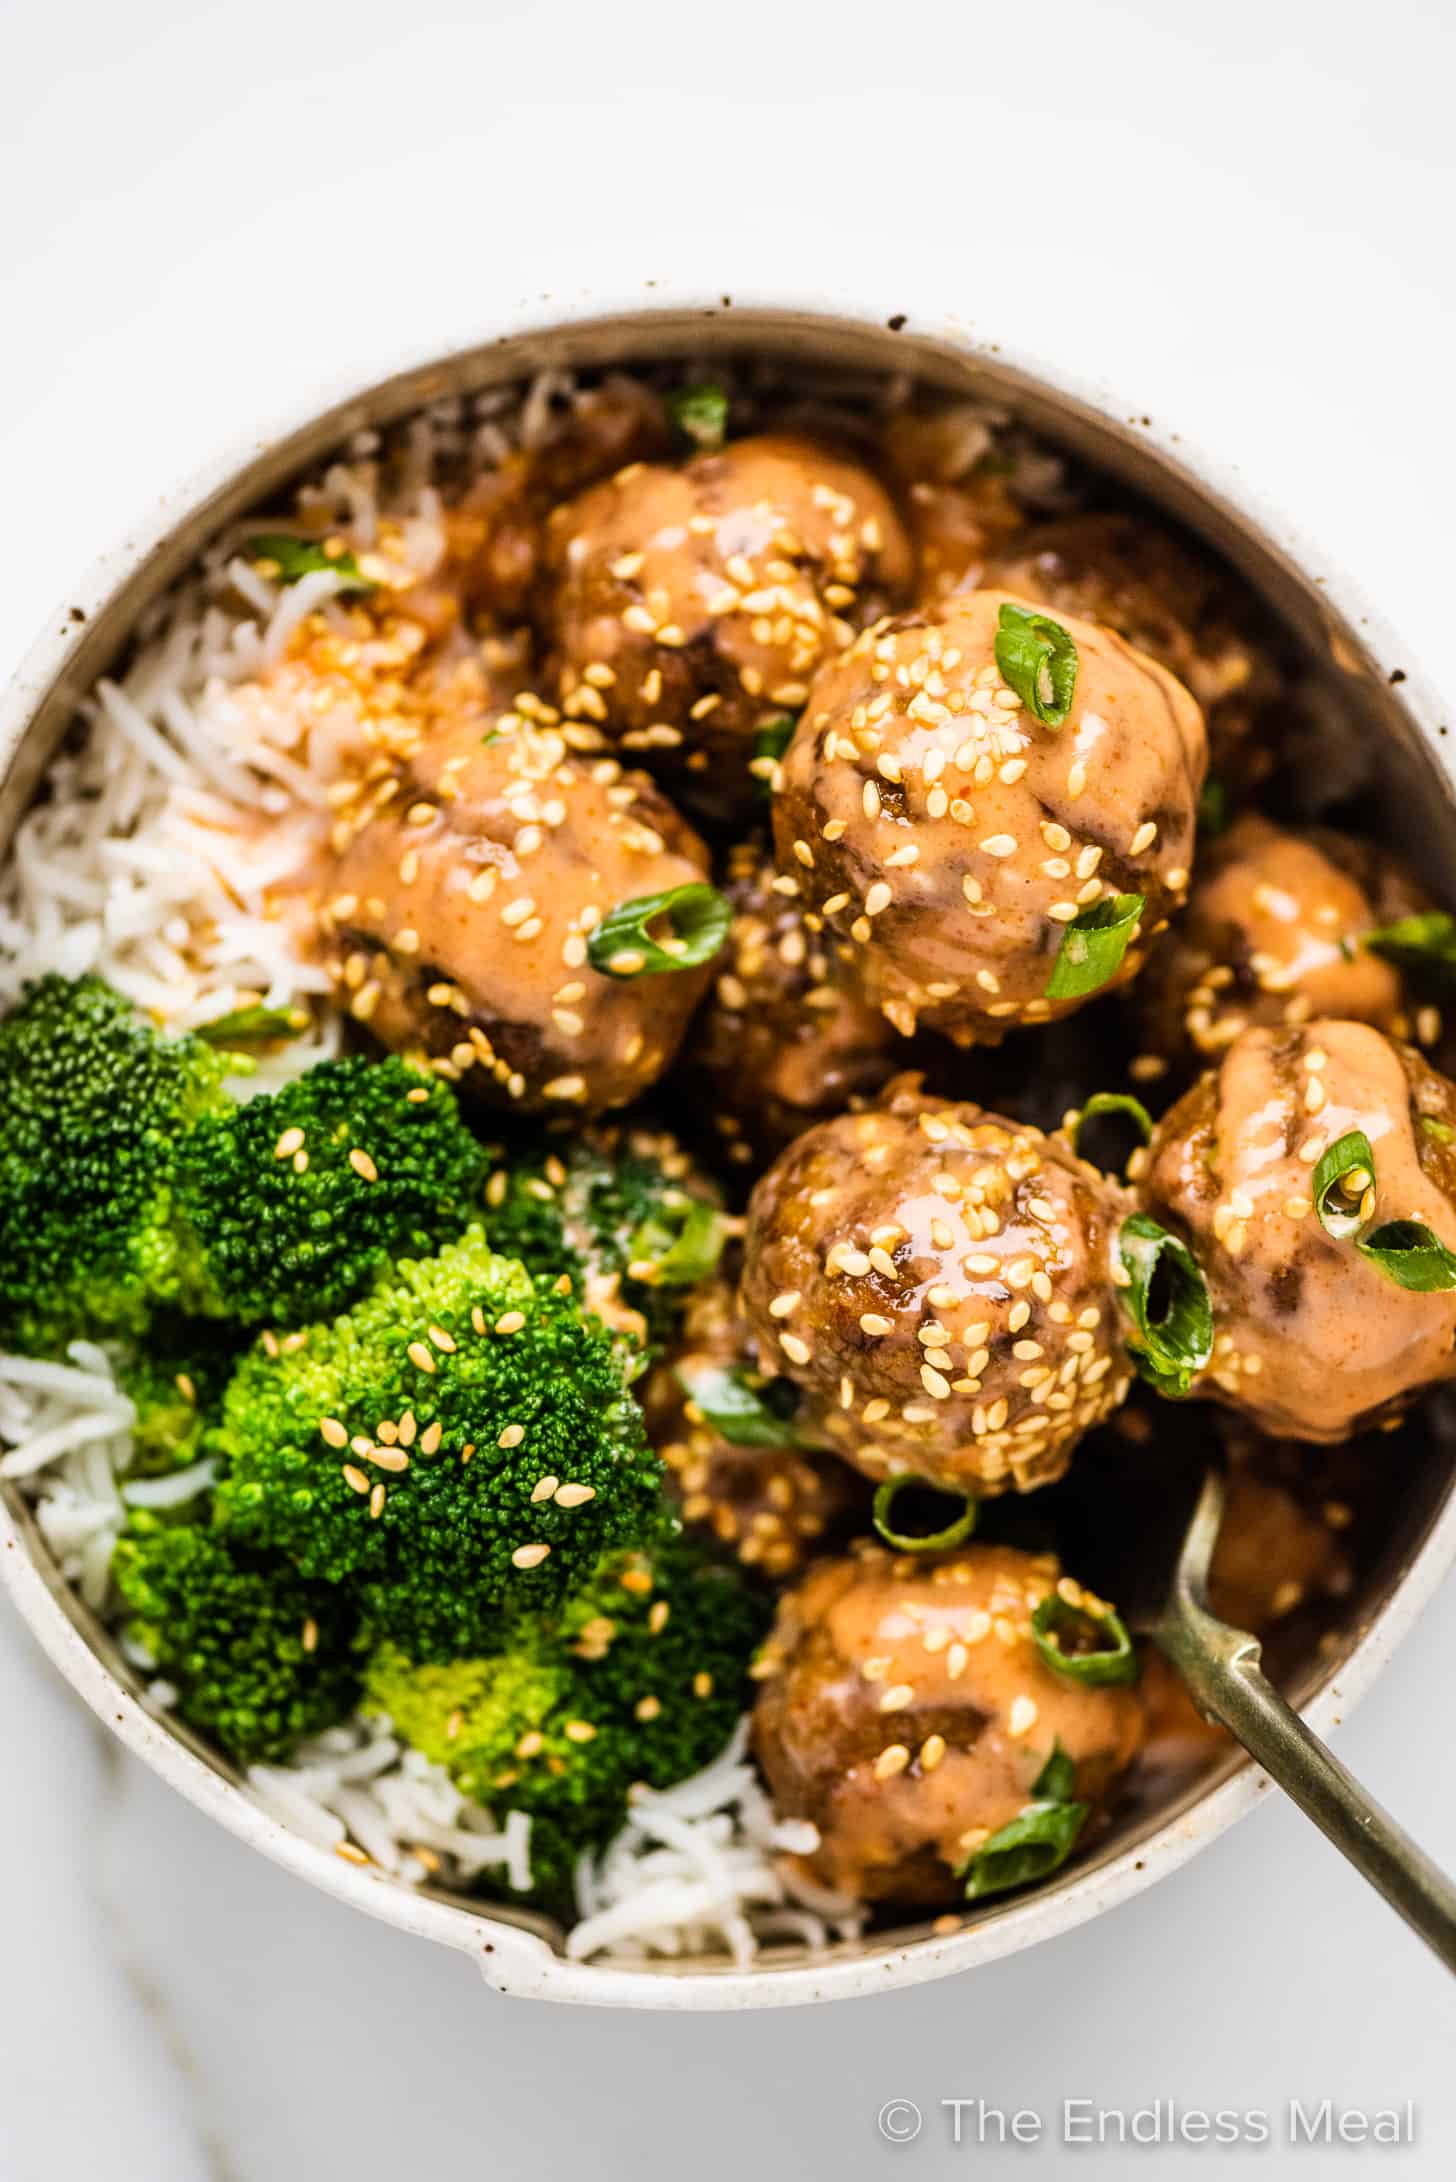 firecracker meatballs in a bowl with rice and broccoli.